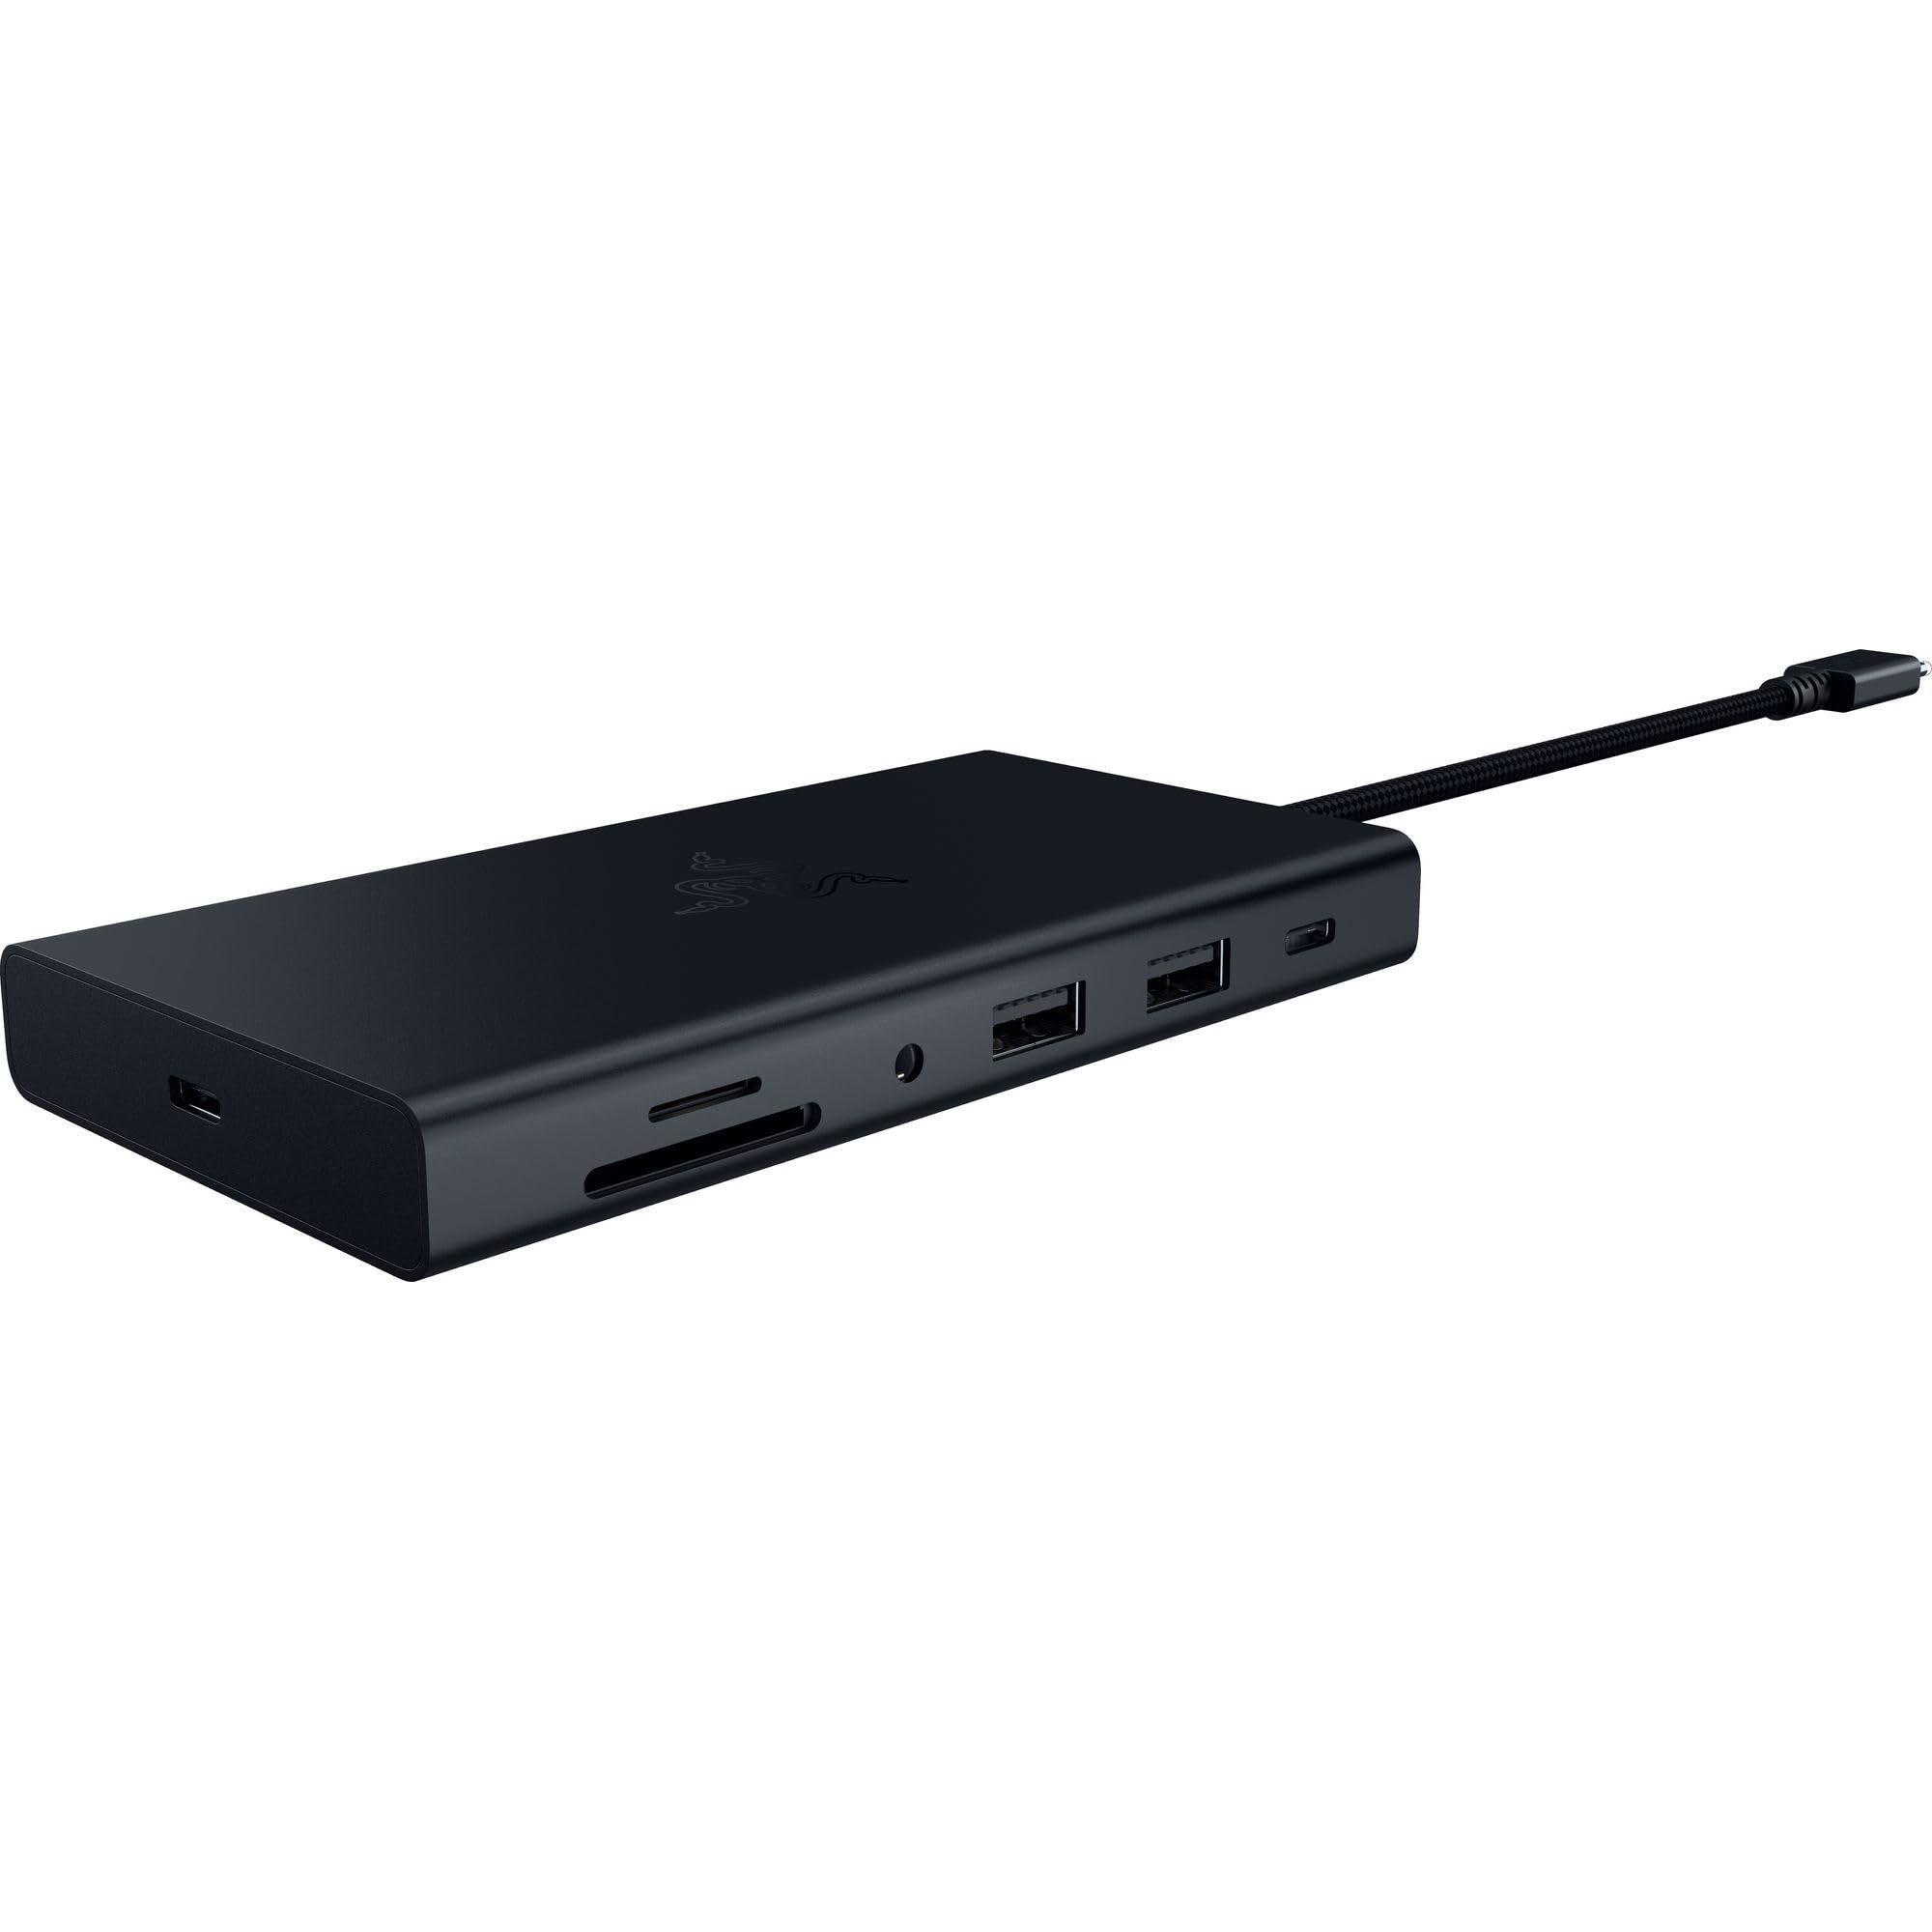 Razer USB C Dock 11-Port Travel Charging Station for Windows Mac Laptop iPad Surface Chromebook Galaxy Tab: Type C, HDMI, Ethernet, MicroSD - 4K 60 Hz Display - 85 W Tablets + Mobile Fast Charge